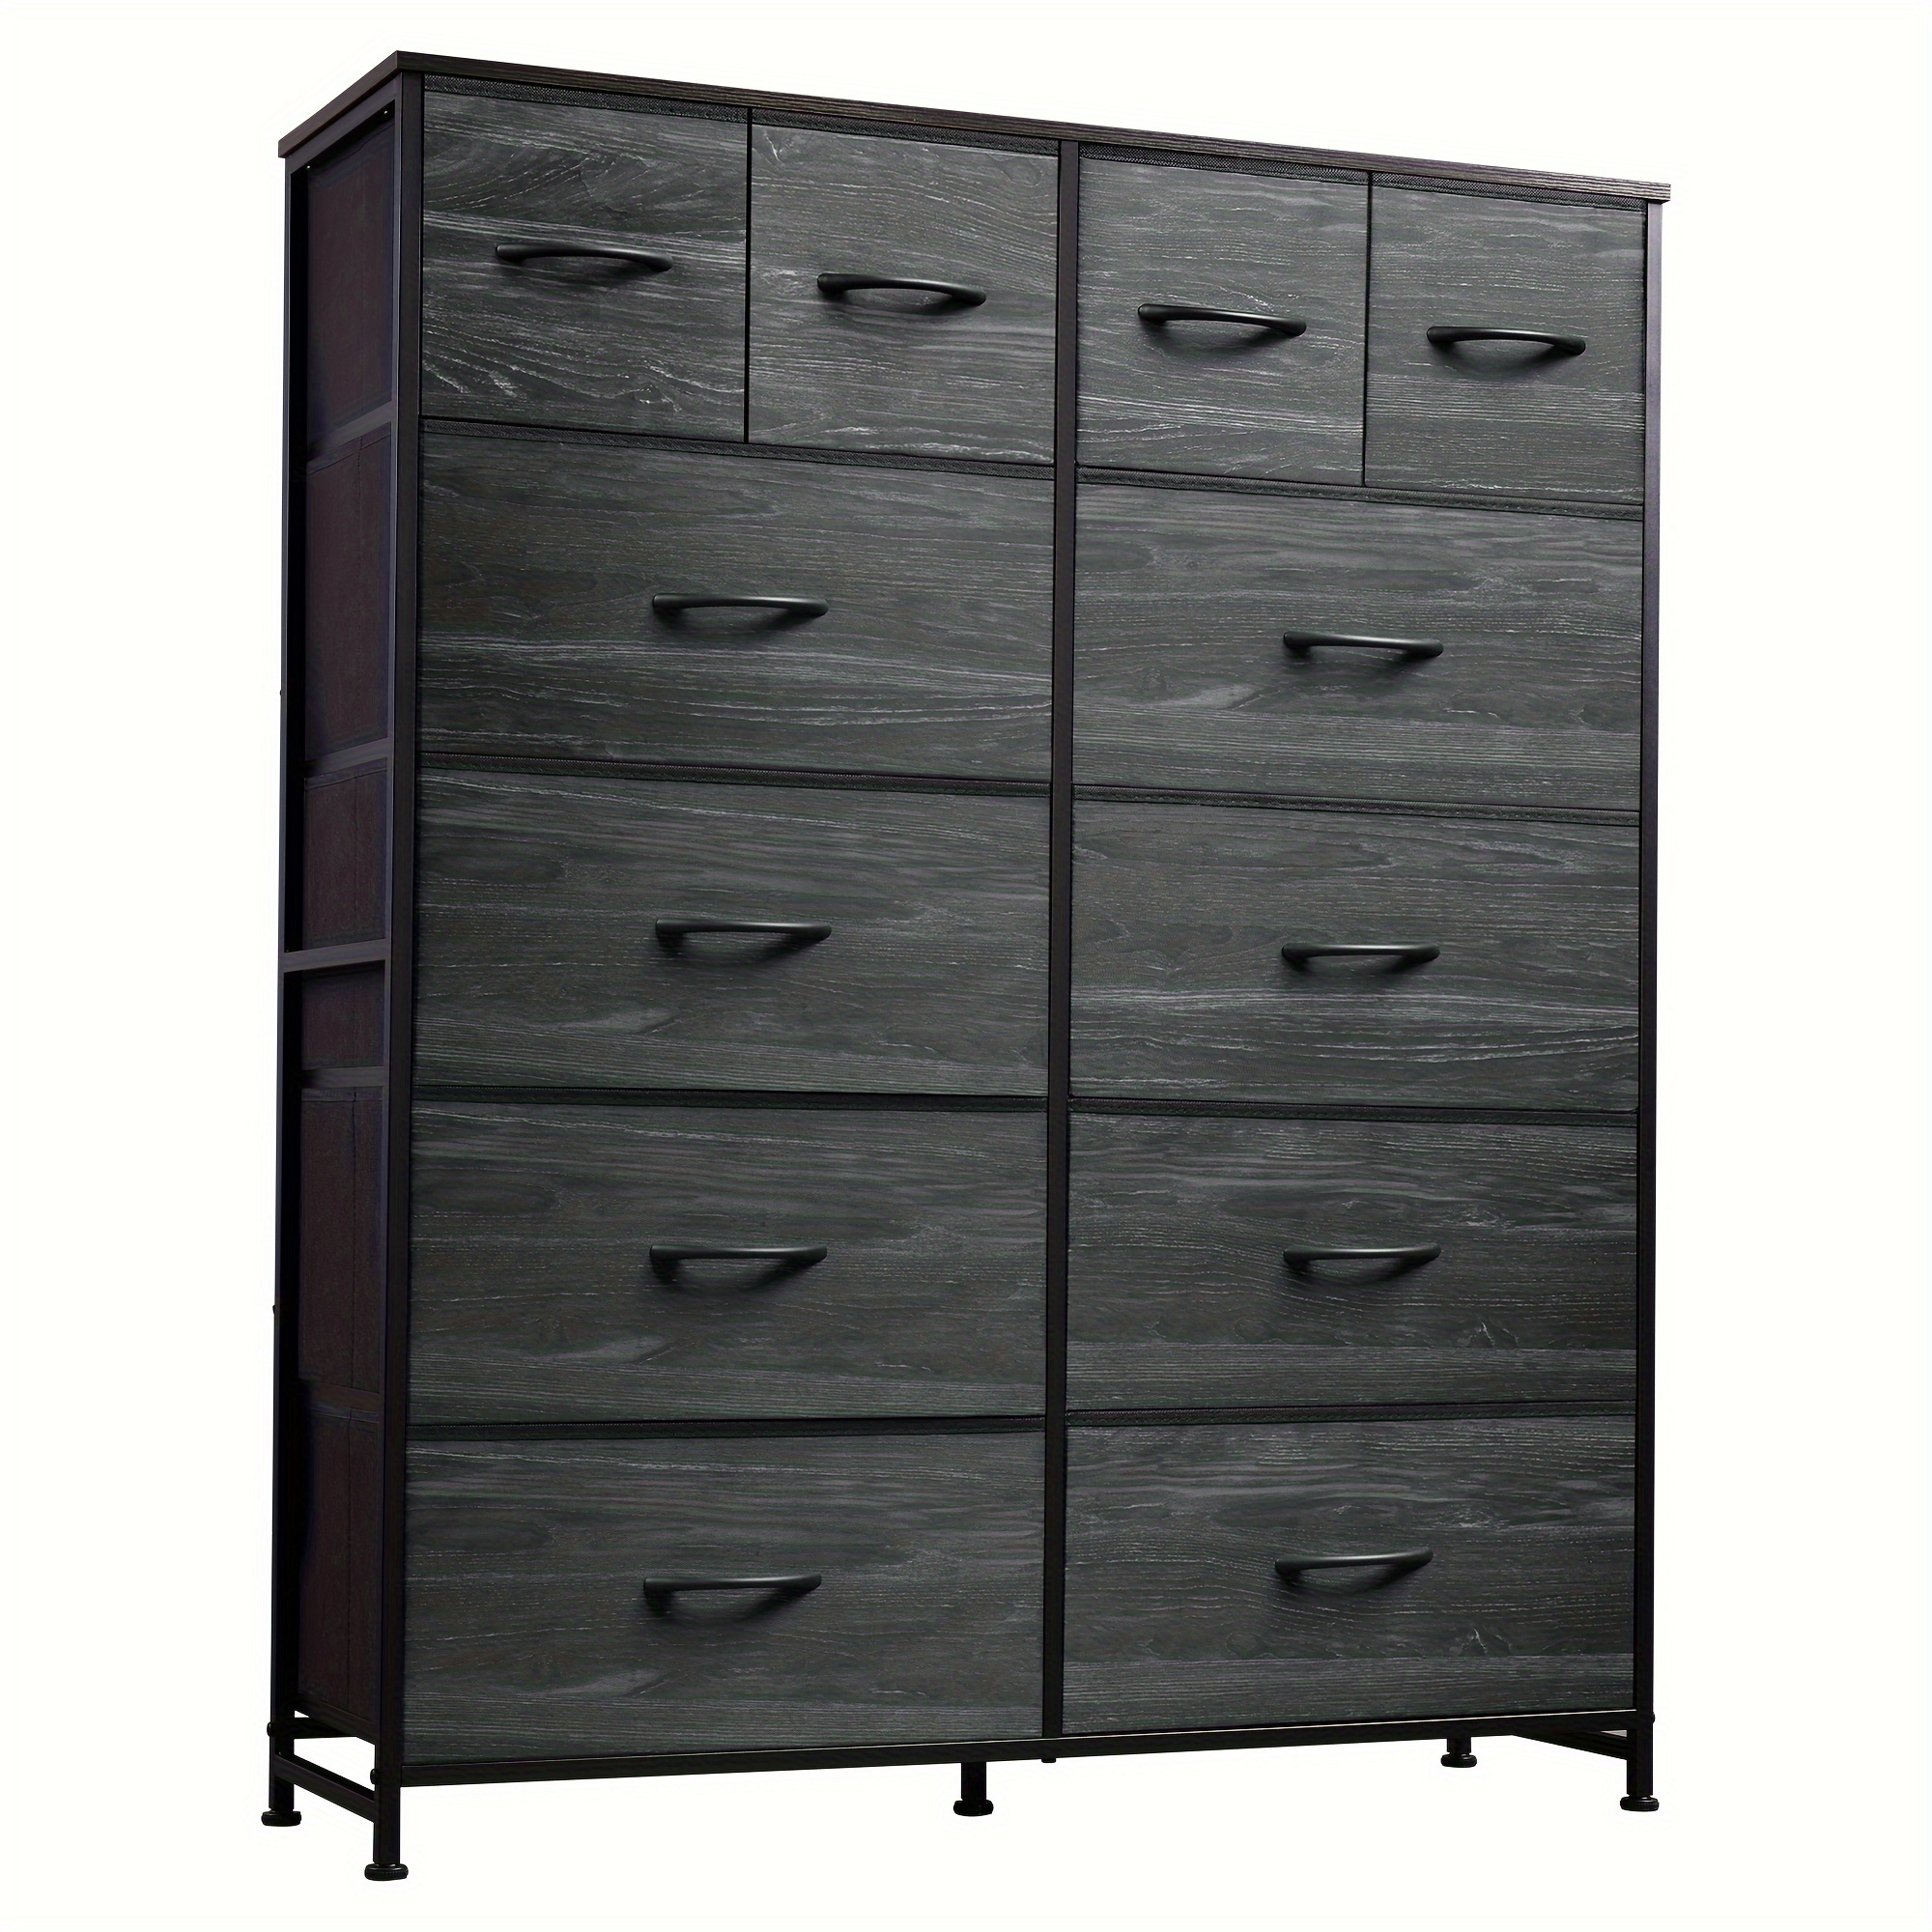 

Wlive Tall Dresser For Bedroom With 12 Drawers, Dressers & Chests Of Drawers, Fabric Dresser For Bedroom, Closet, Fabric Storage Dresser With Drawers, Steel Frame